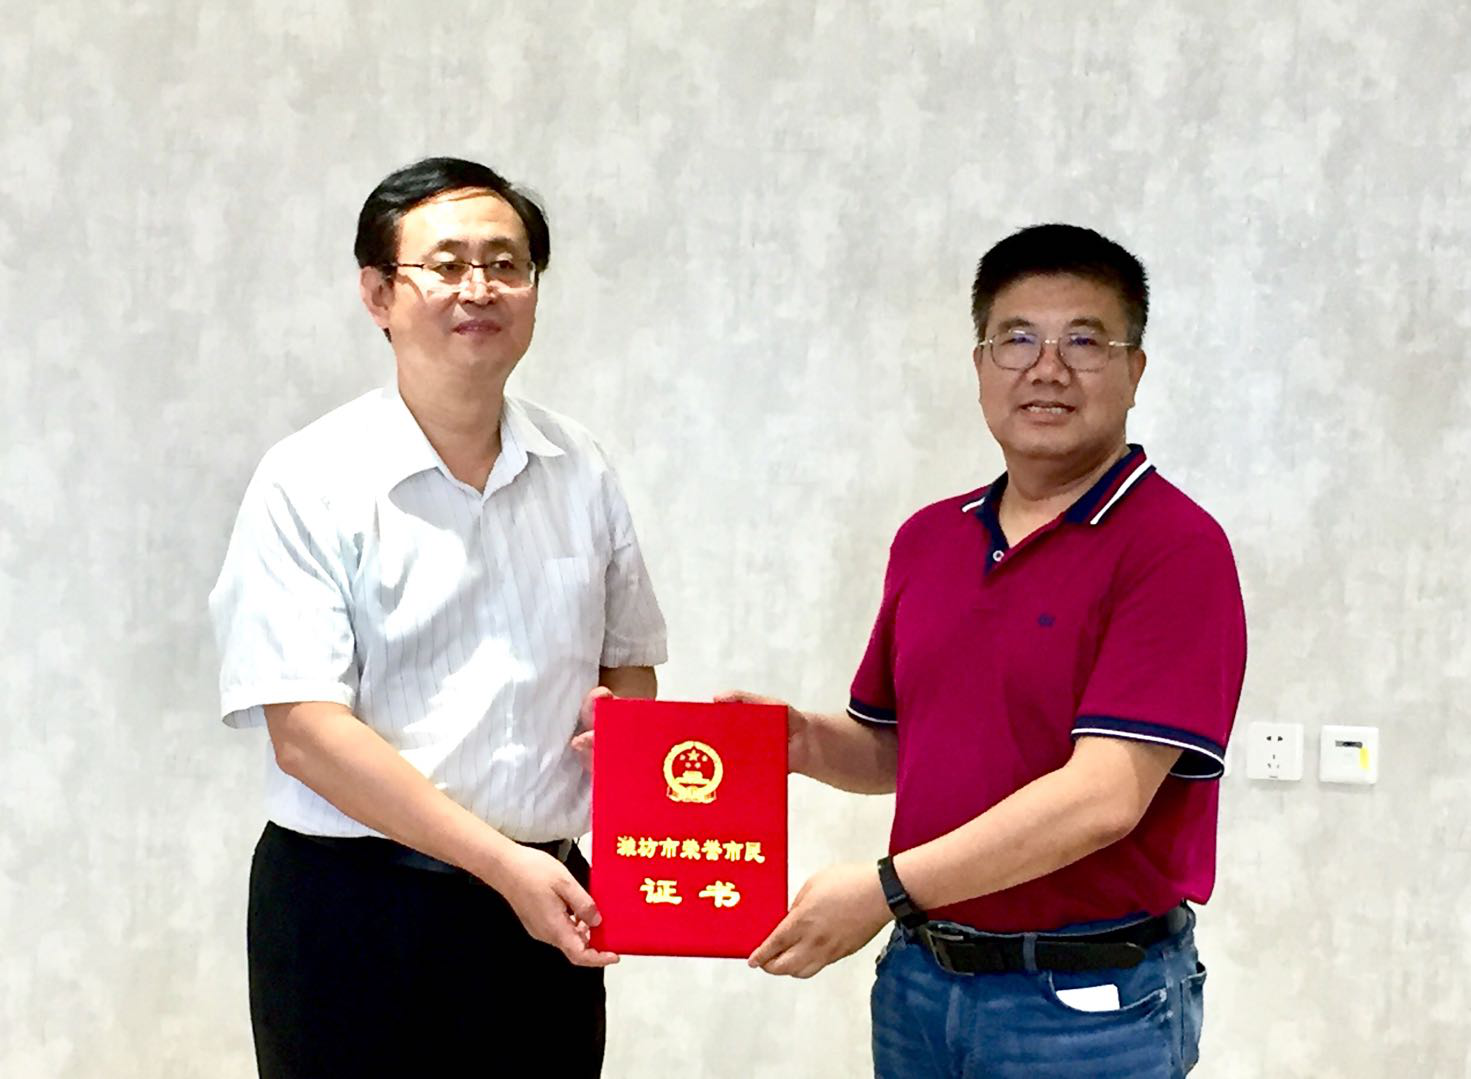 Nedham was awarded “Honorary Citizen of Weifang”